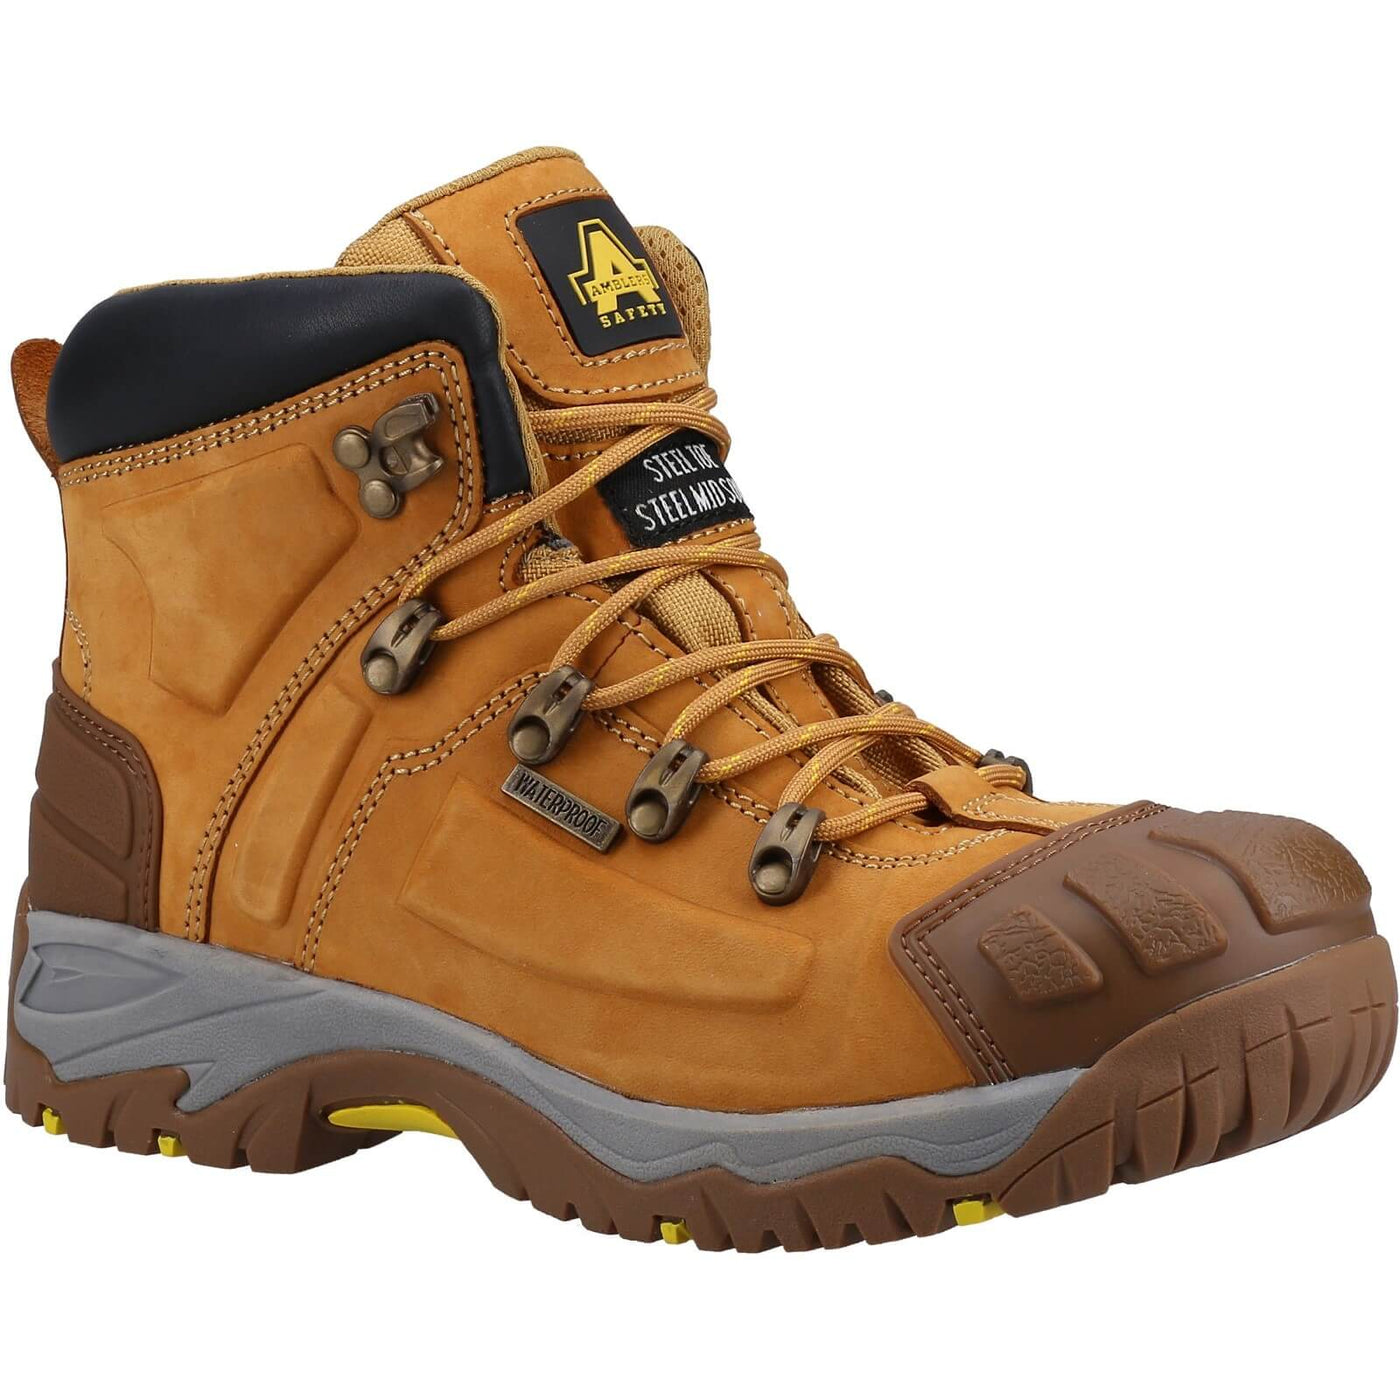 Amblers 33 Waterproof Safety Boots Honey 1#colour_honey